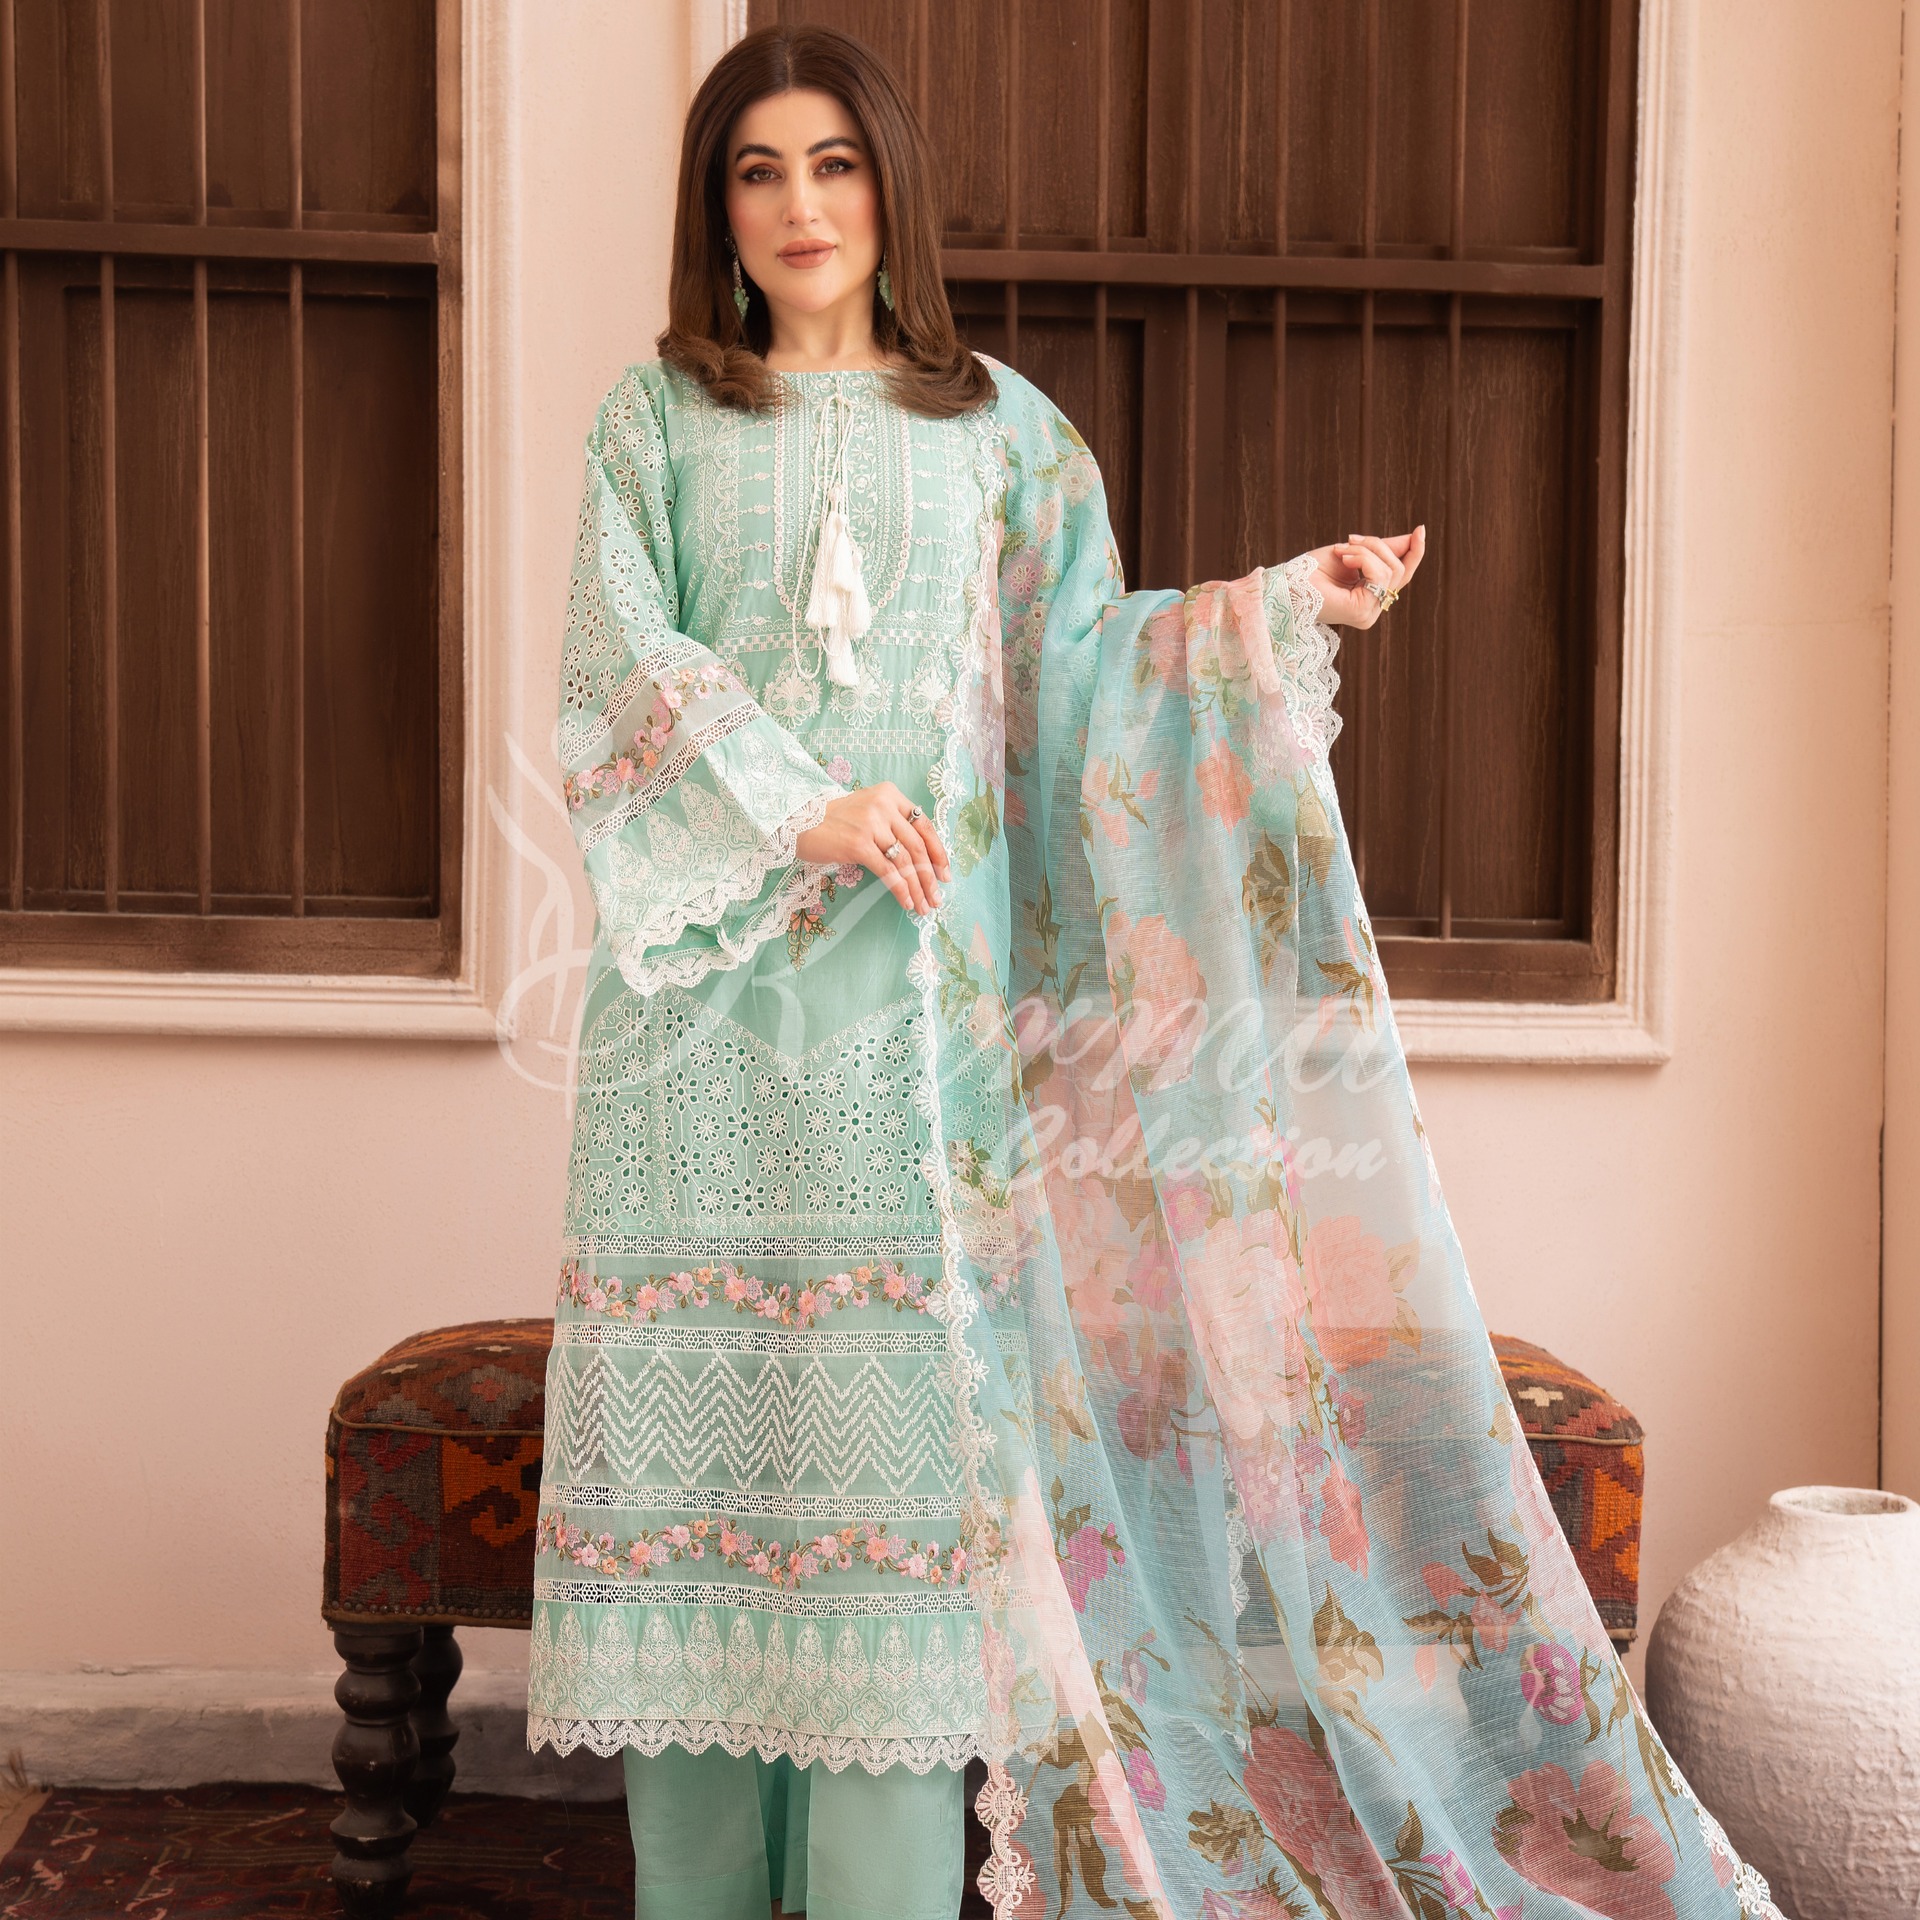 Karma Light Turquoise 3 Piece Lawn Outfit